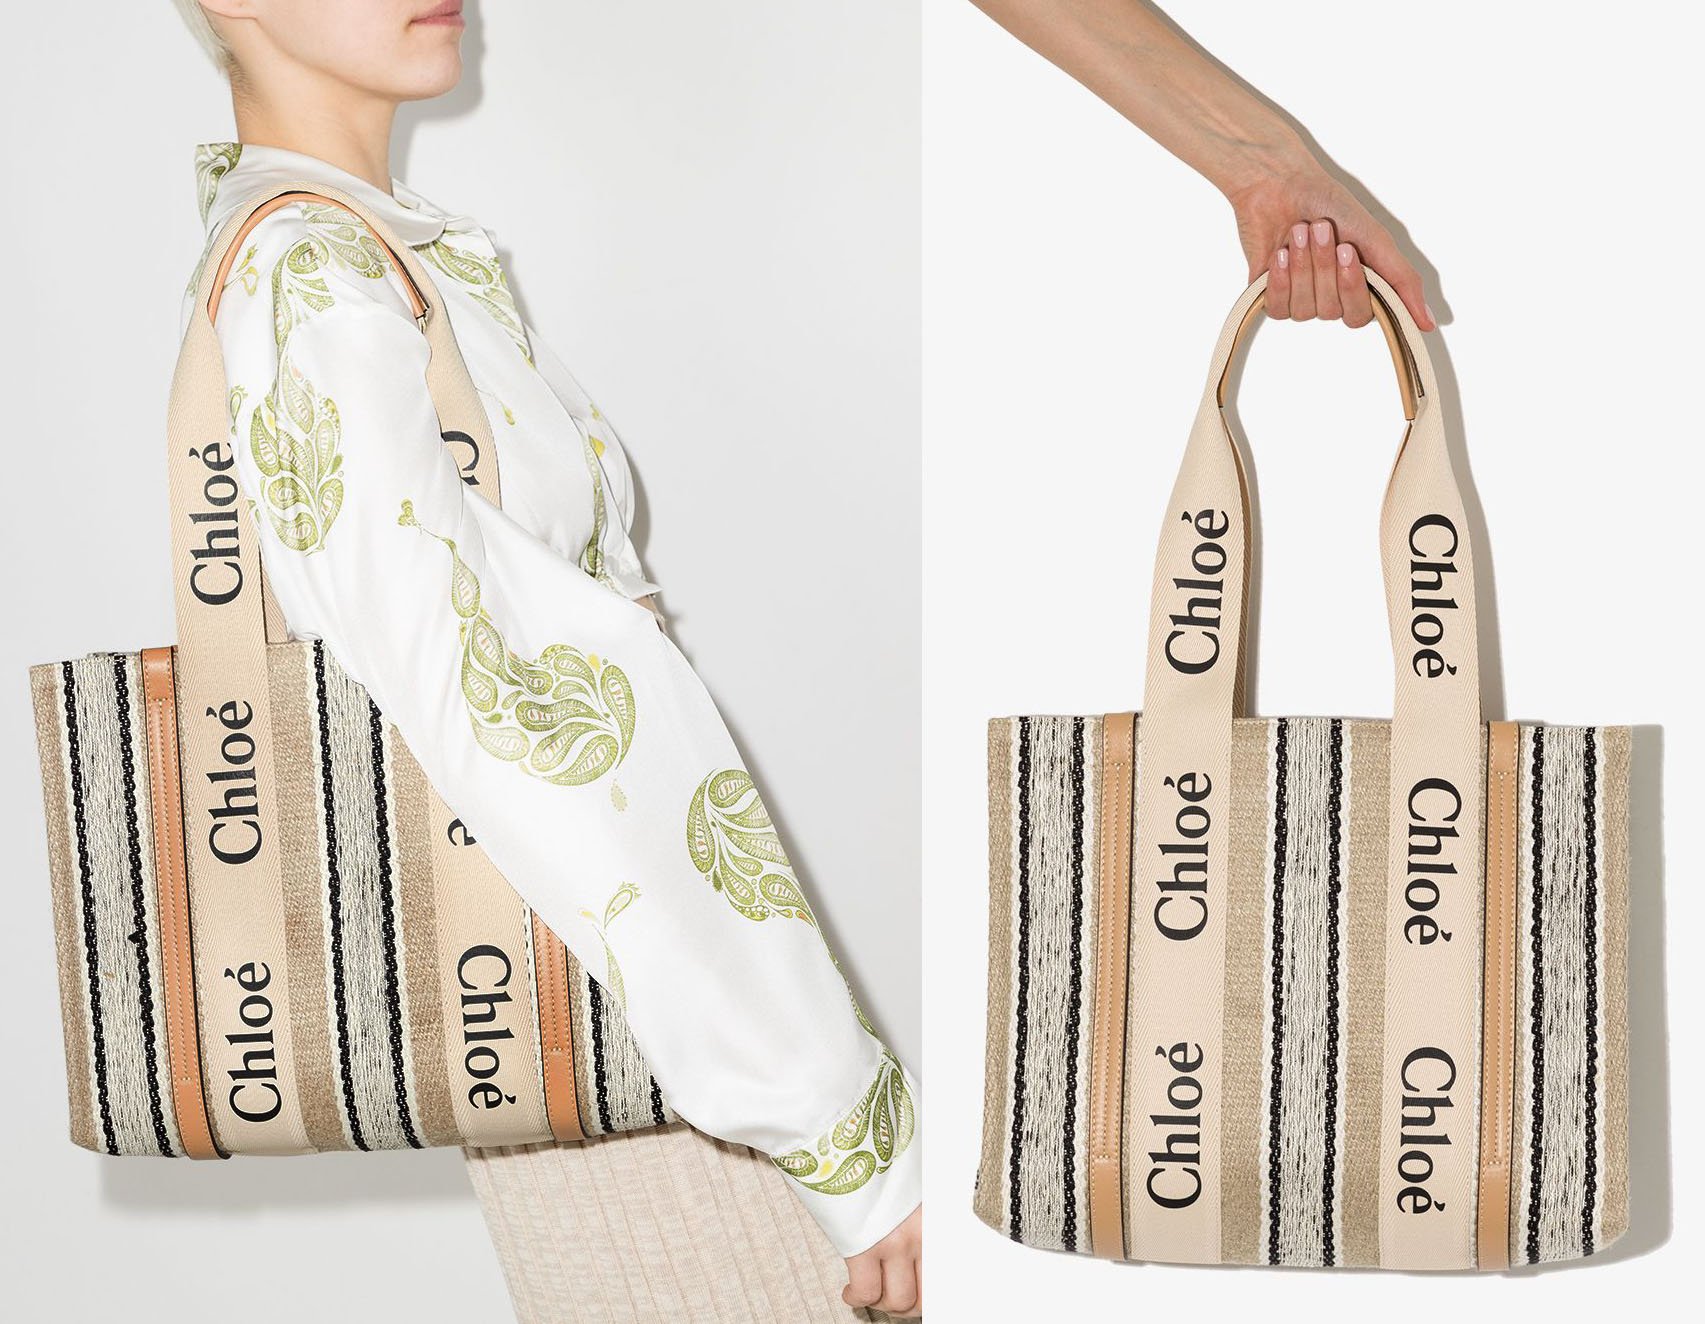 Chloe's Woody tote is defined by its canvas construction and logo branding